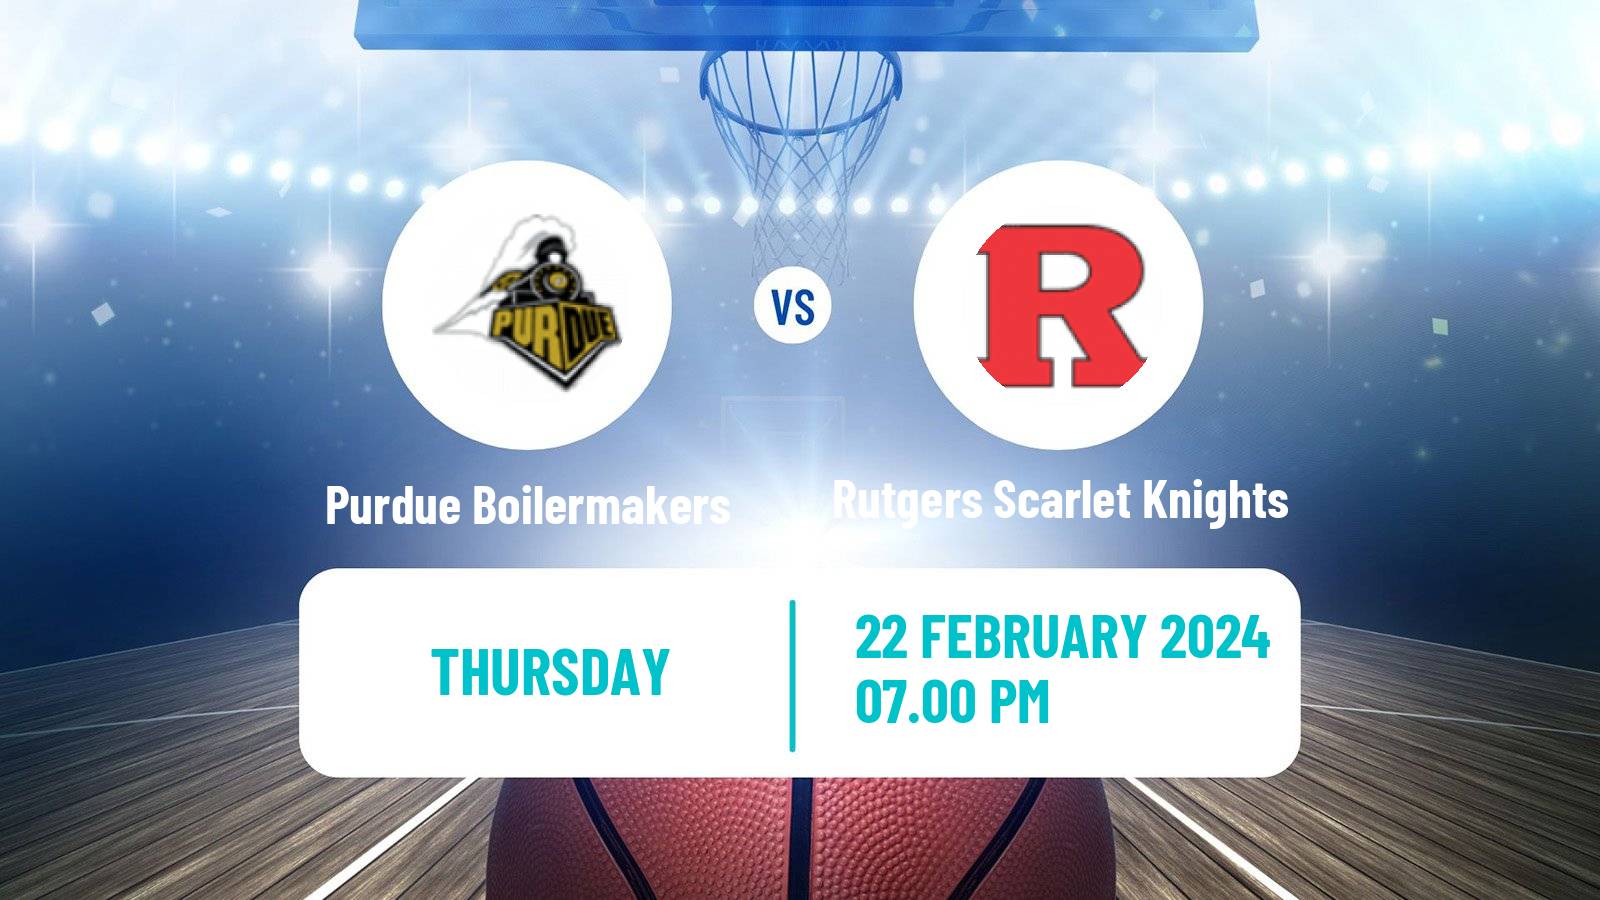 Basketball NCAA College Basketball Purdue Boilermakers - Rutgers Scarlet Knights